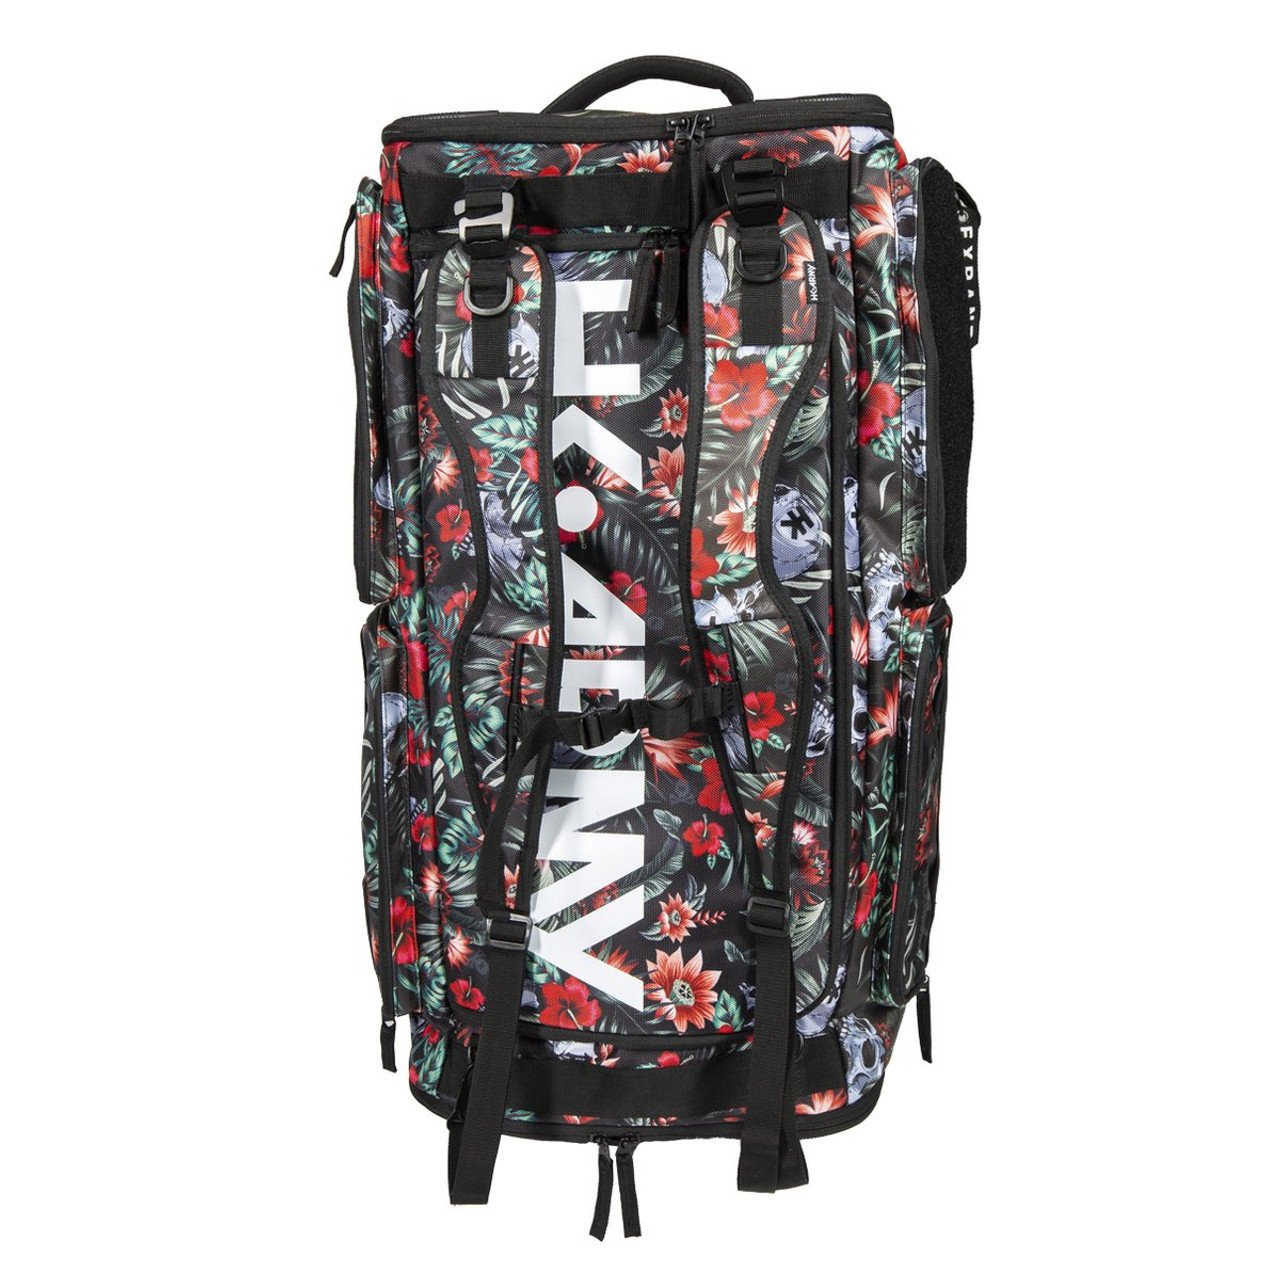 HK - Expand Roller Gearbag - Tropical Skull